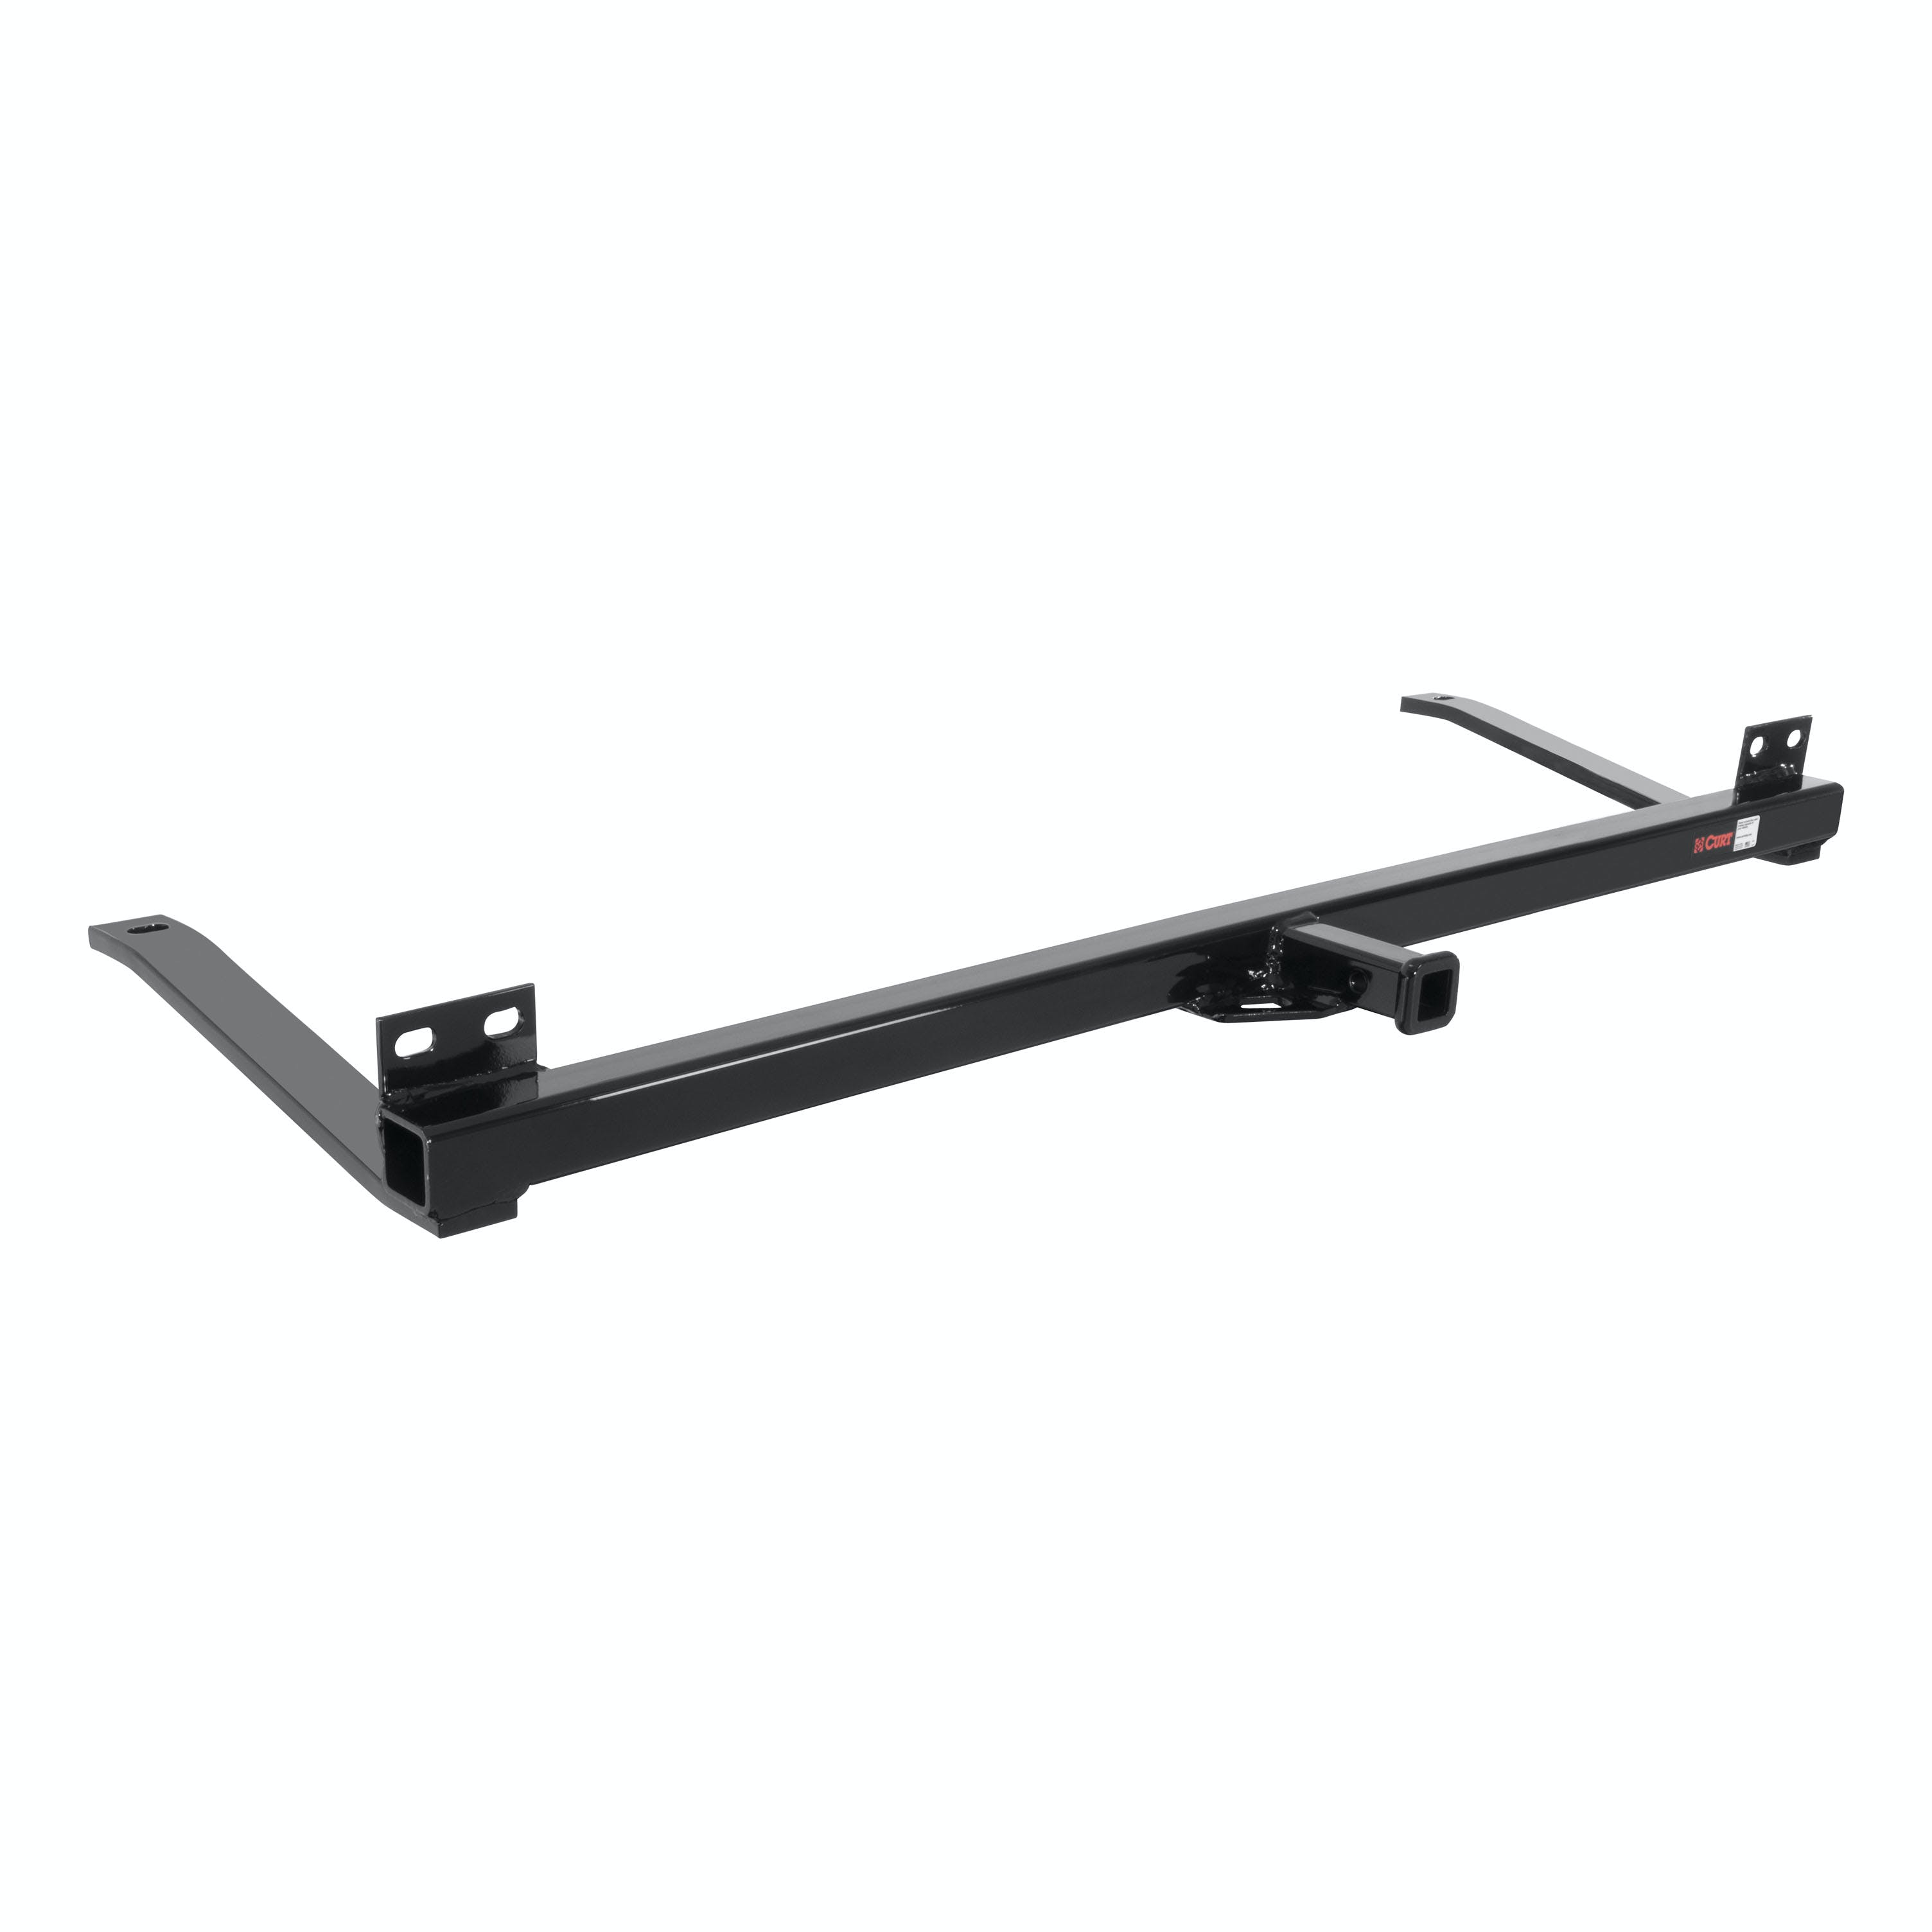 CURT 12005 Class 2 Hitch, 1-1/4, Select Buick, Chevrolet, Oldsmobile, Pontiac Vehicles